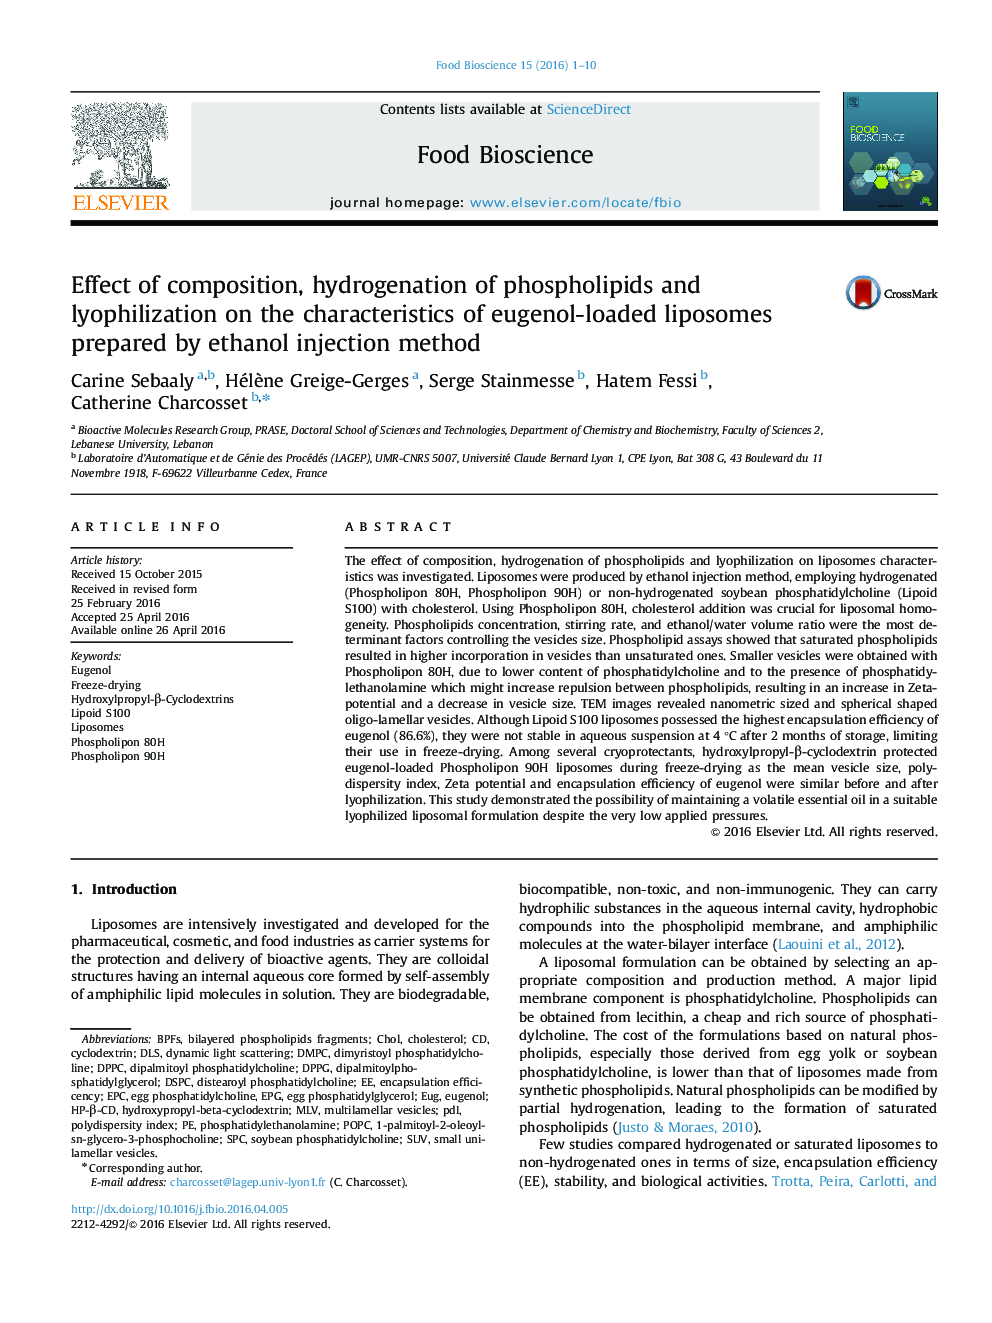 Effect of composition, hydrogenation of phospholipids and lyophilization on the characteristics of eugenol-loaded liposomes prepared by ethanol injection method